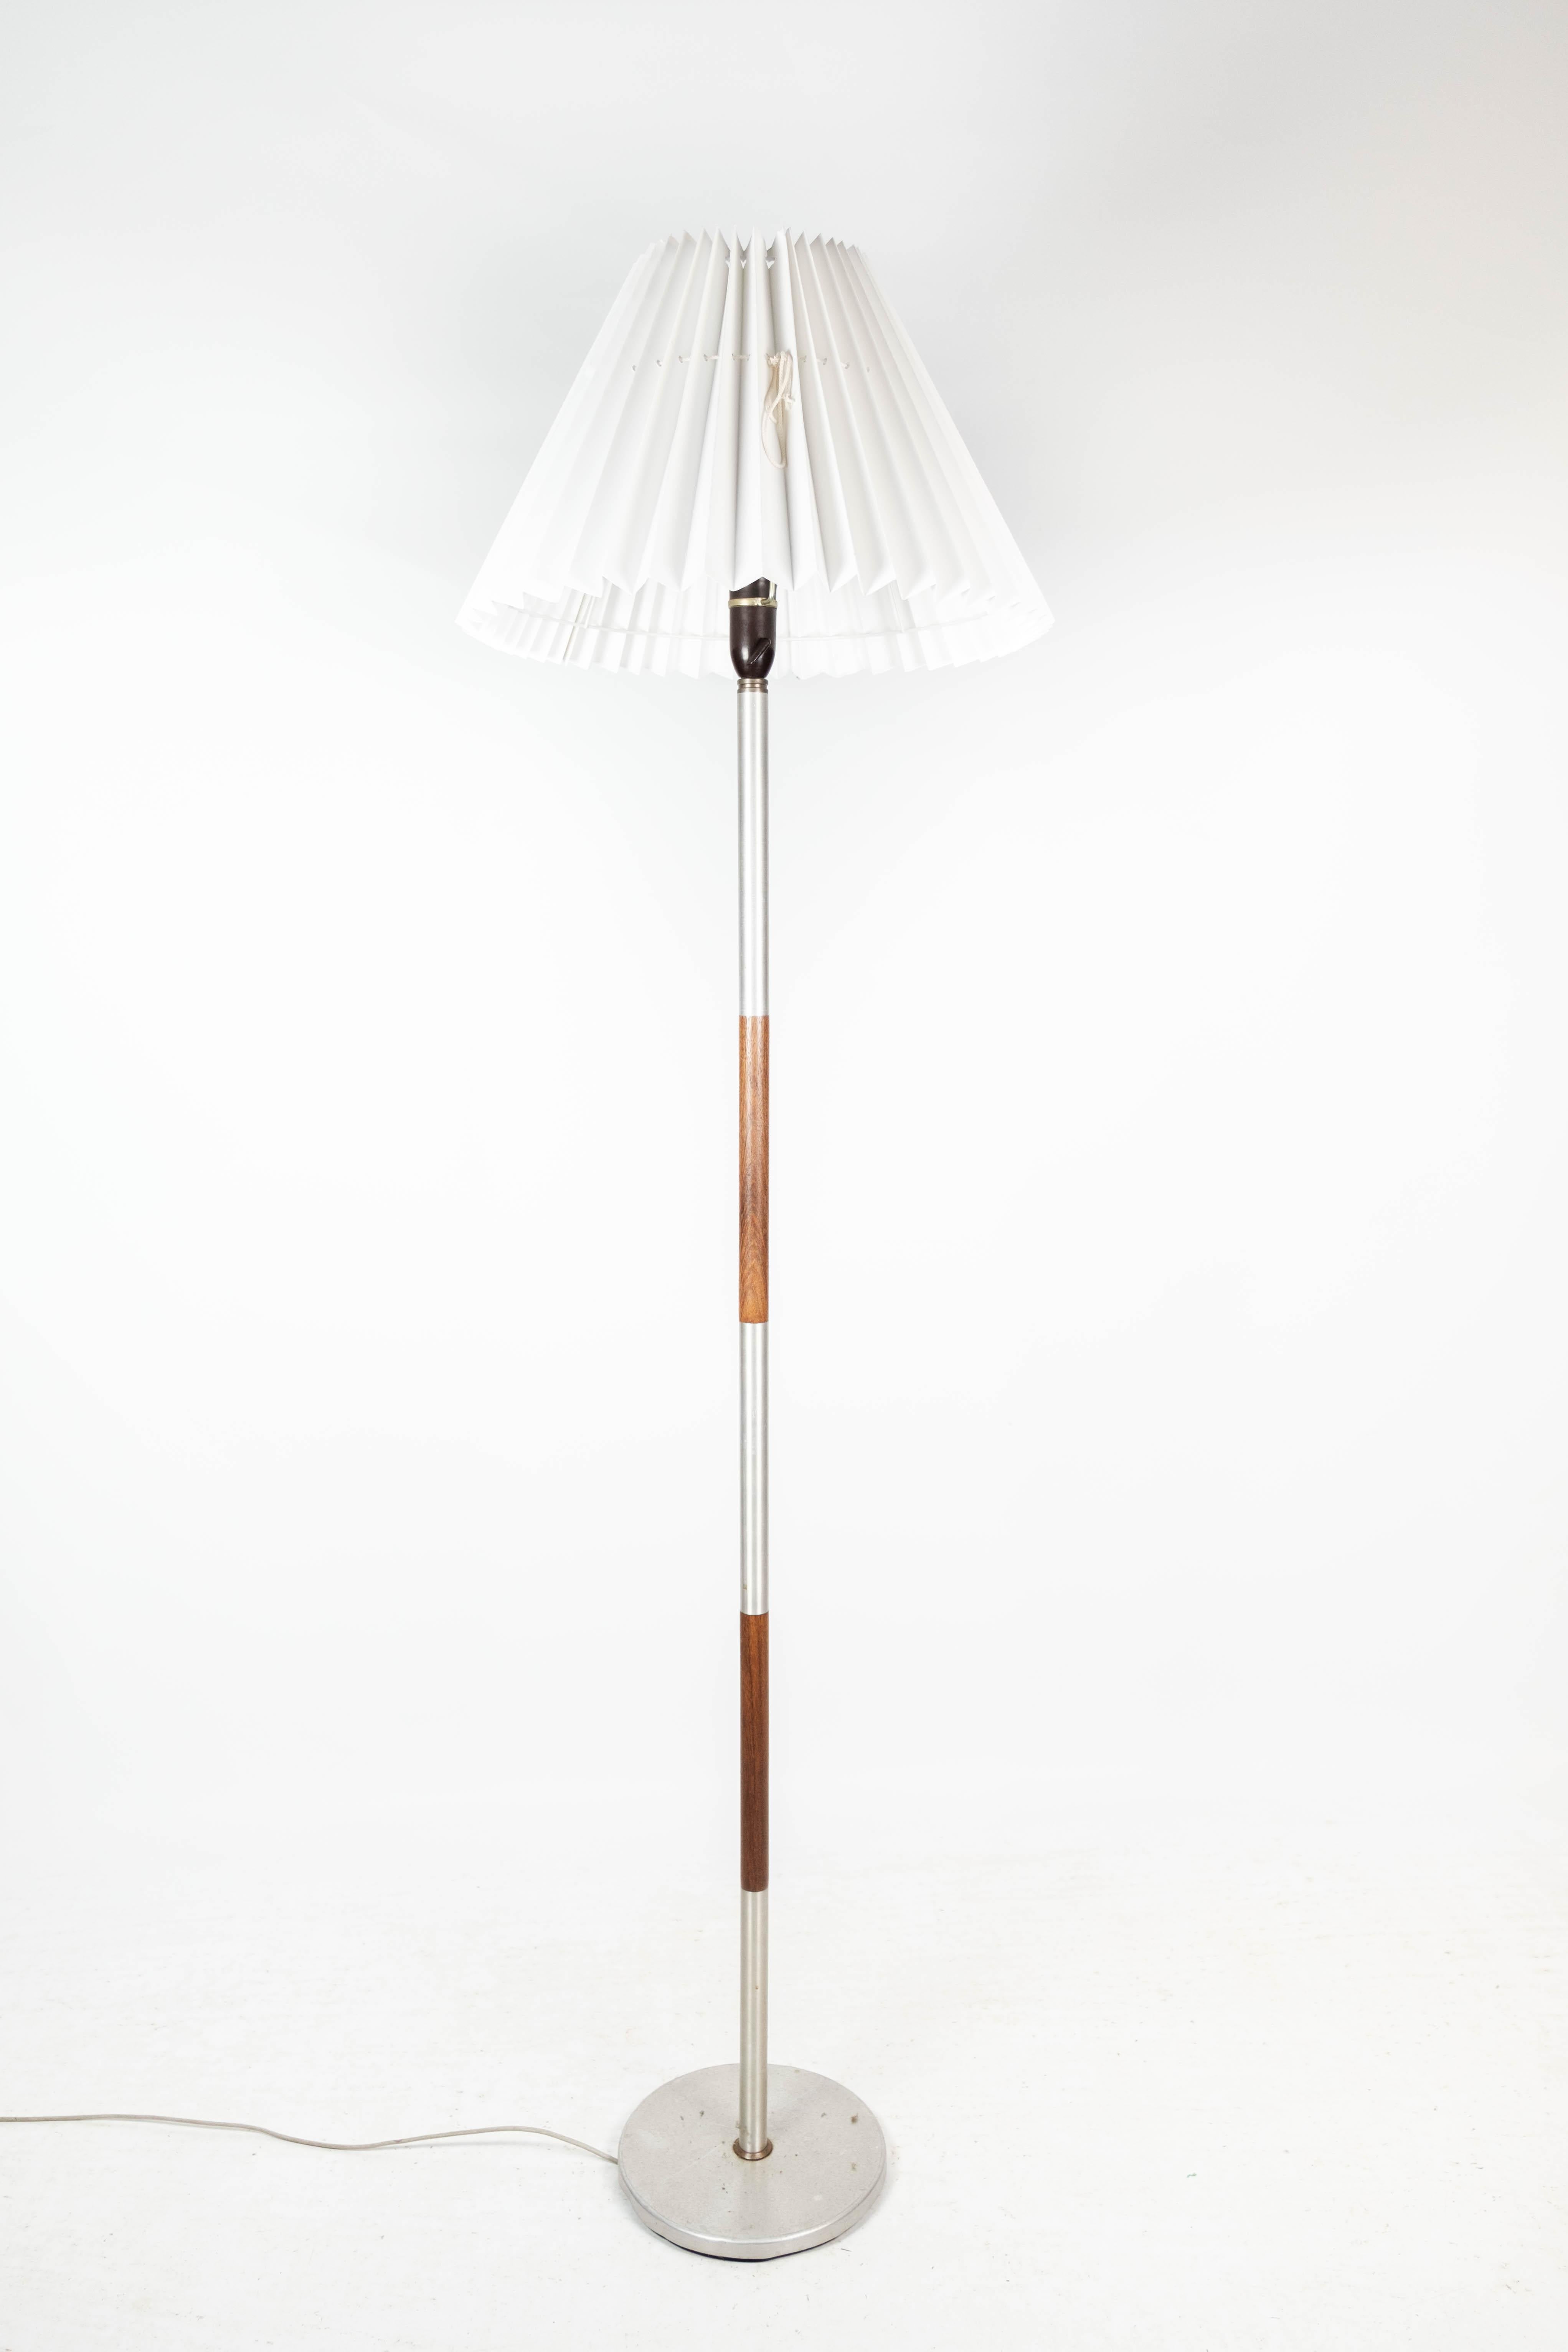 Floor lamp in rosewood and metal, of Danish design from the 1960s. When buying this lamp, a hand made white shade of Danish design is included in the price. The lamp is in great vintage condition.